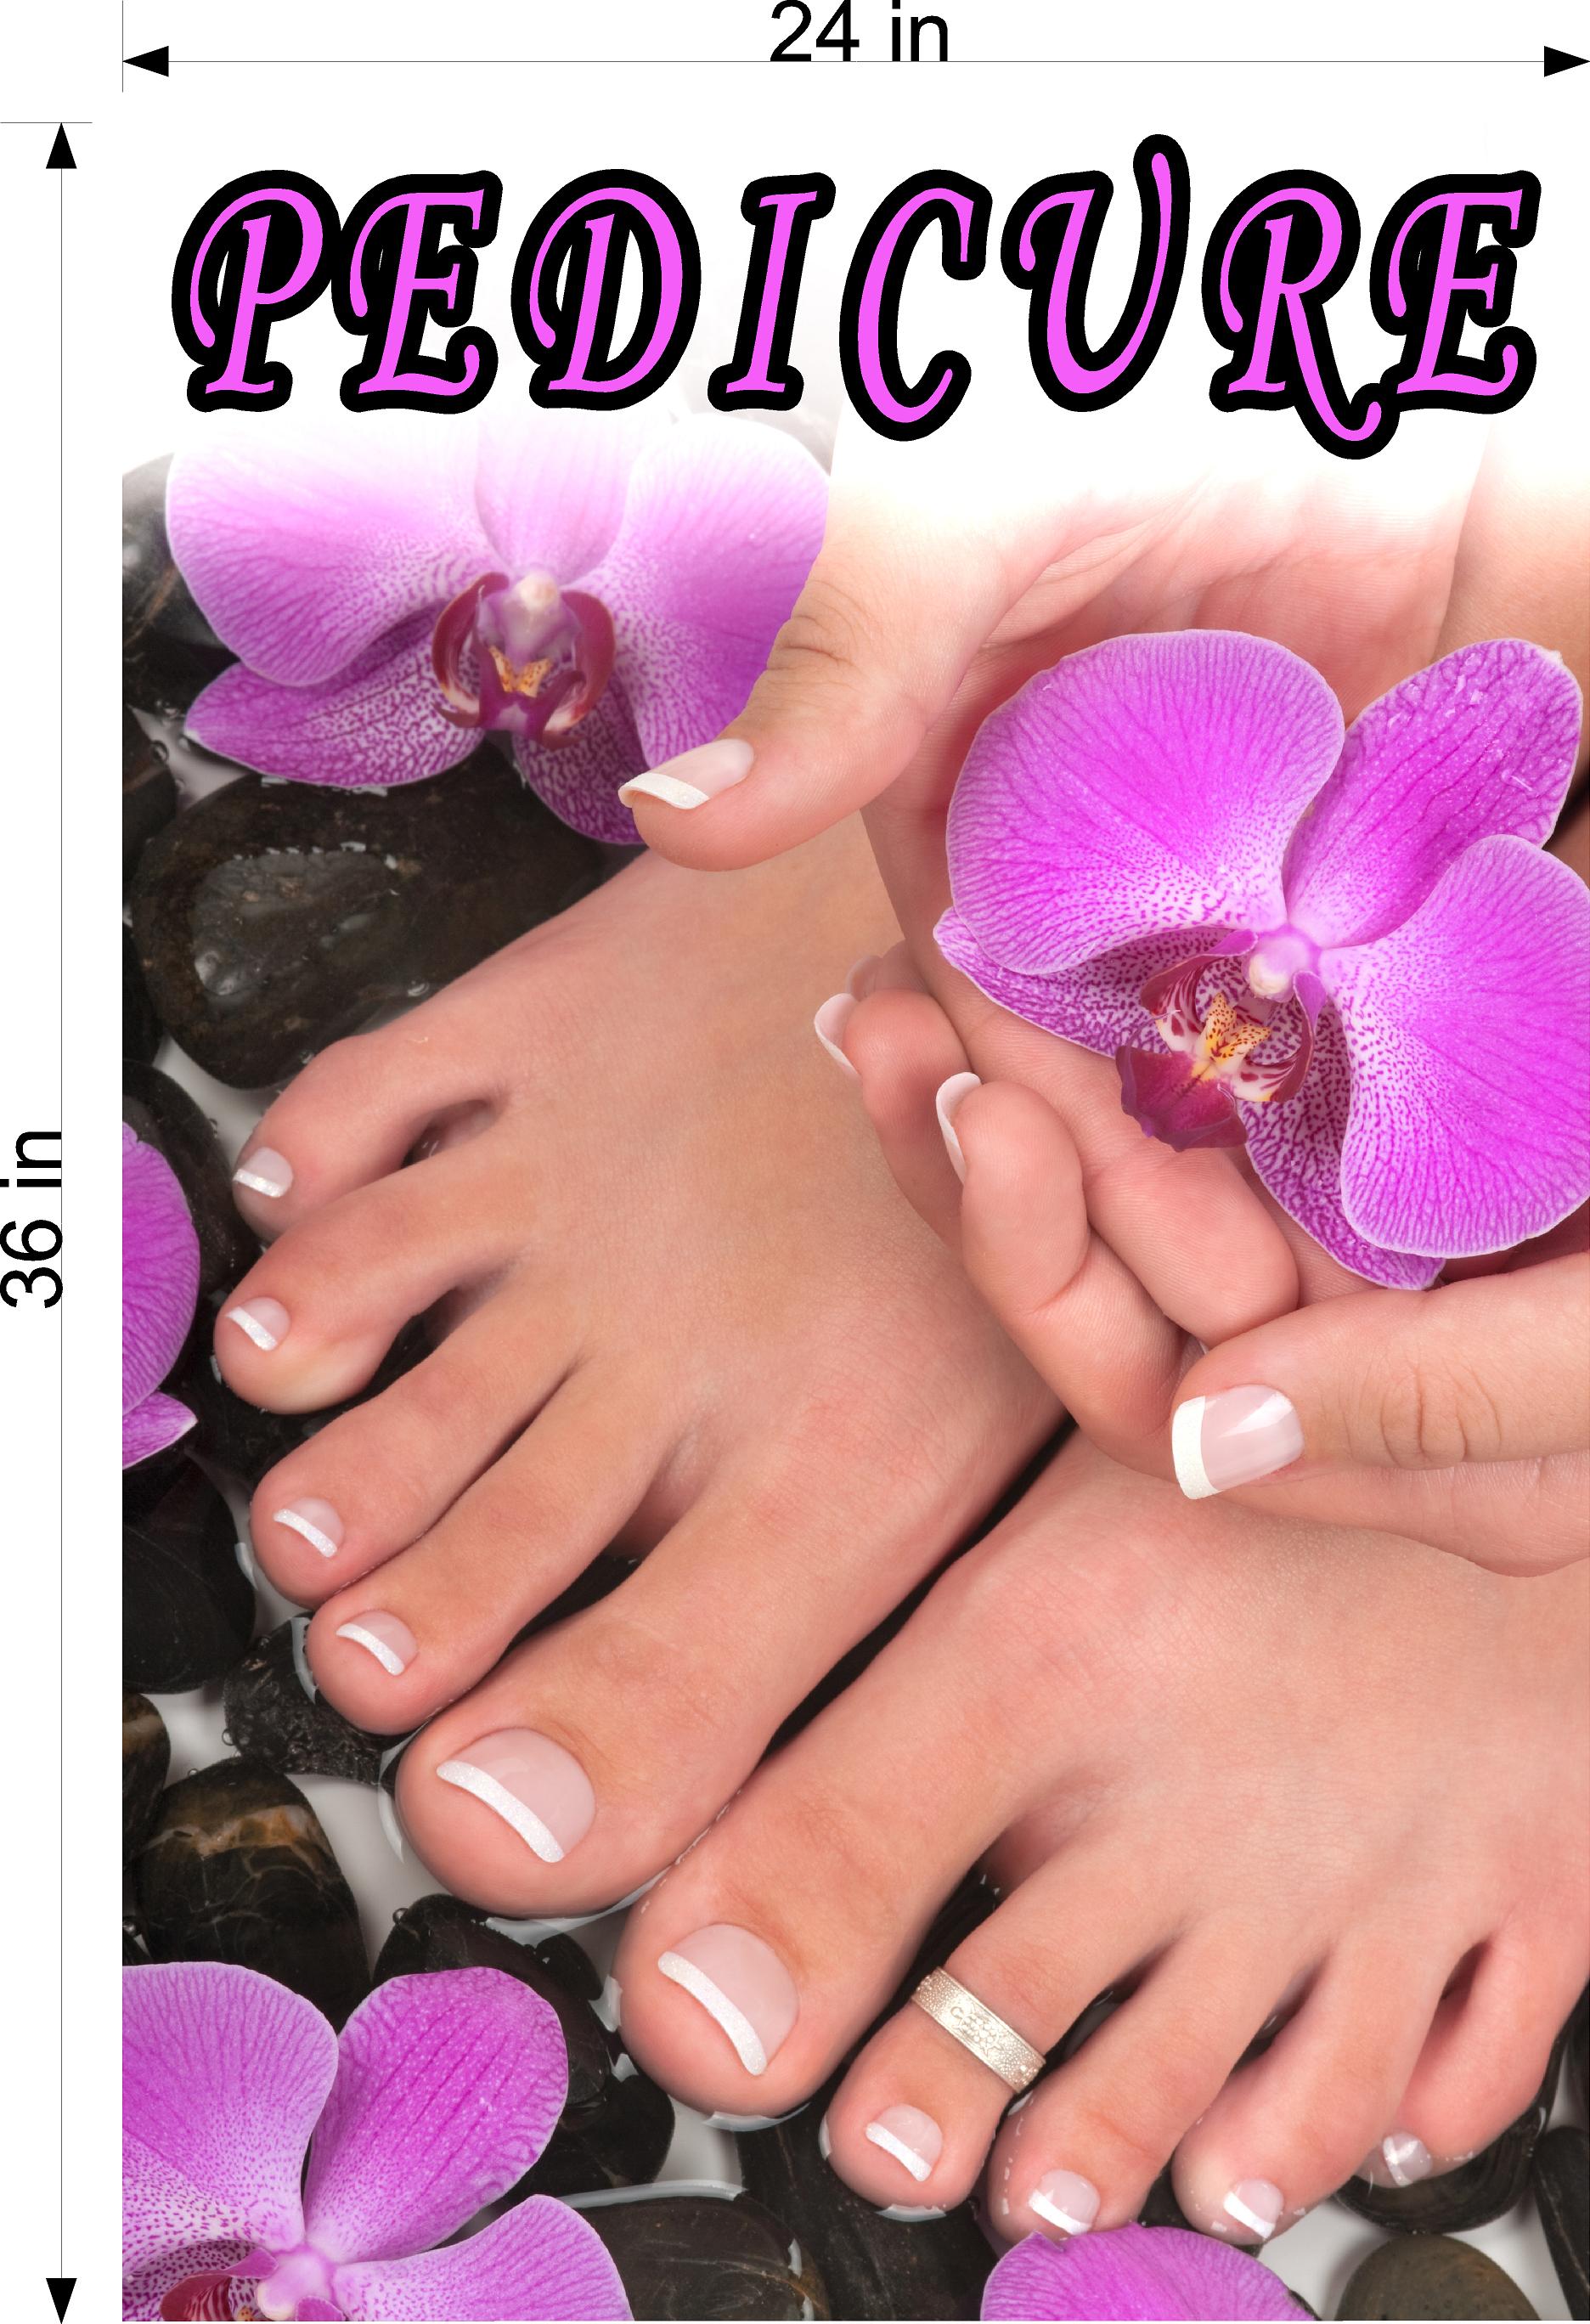 Pedicure 08 Wallpaper Poster Decal with Adhesive Backing Wall Sticker Decor Indoors Interior Sign Vertical